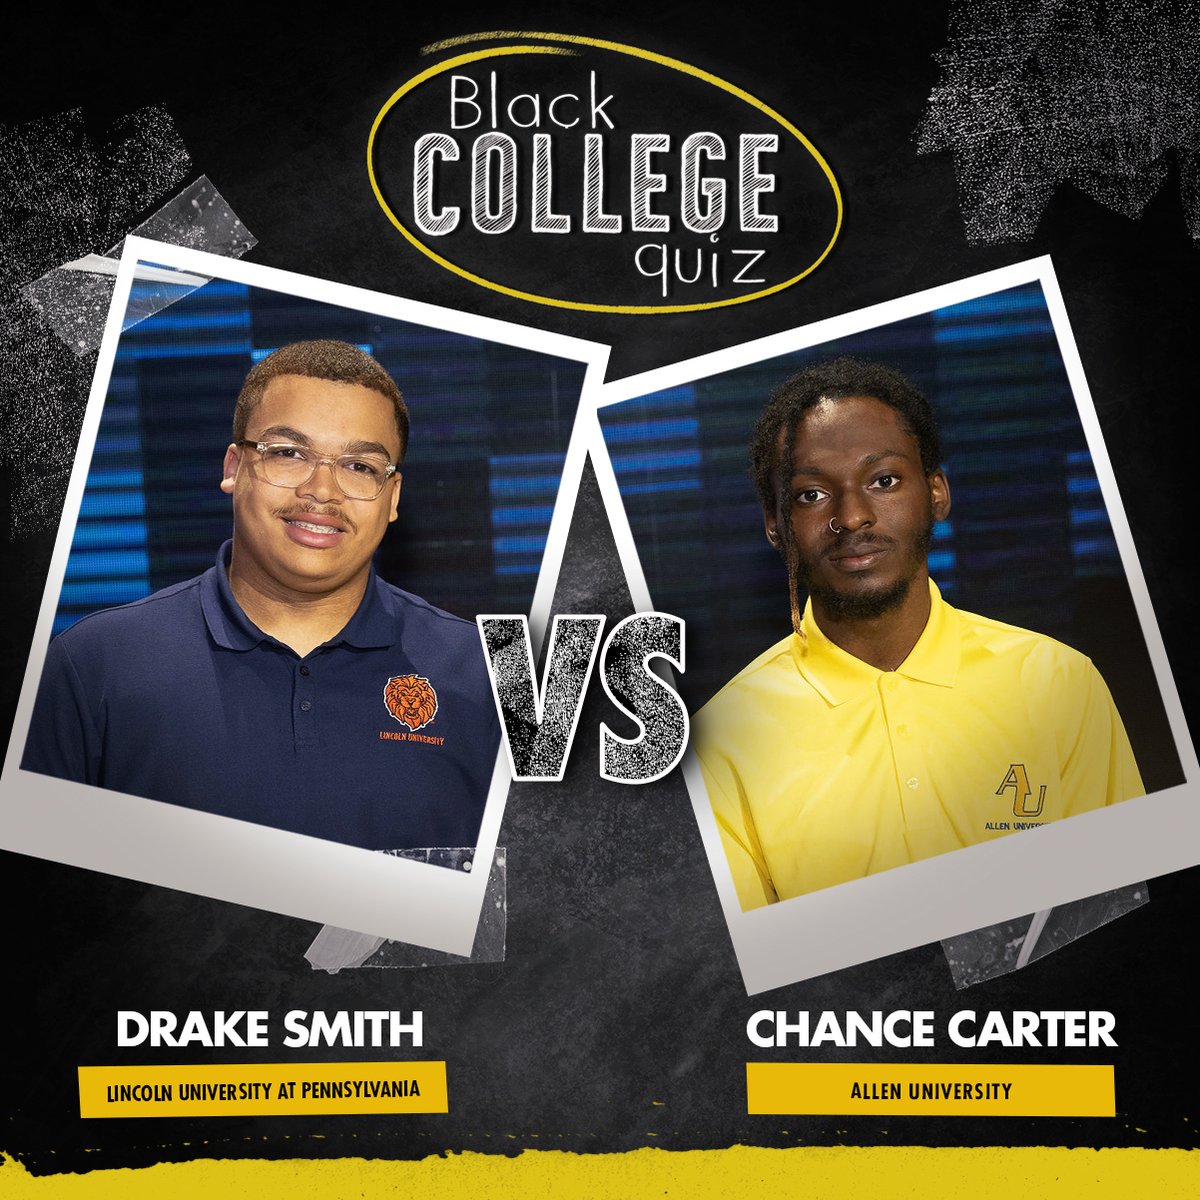 Witness the ultimate showdown as two brilliant students go head-2-head on the @blkcollegequiz! @LincolnUofPA vs. @AllenUniv. Who will emerge victorious? Find airing info at blackcollegequiz.com #BlackCollegeQuiz #GameOn #hbcu #hbcupride #bcq #lincolnuofpa #allenuniversity